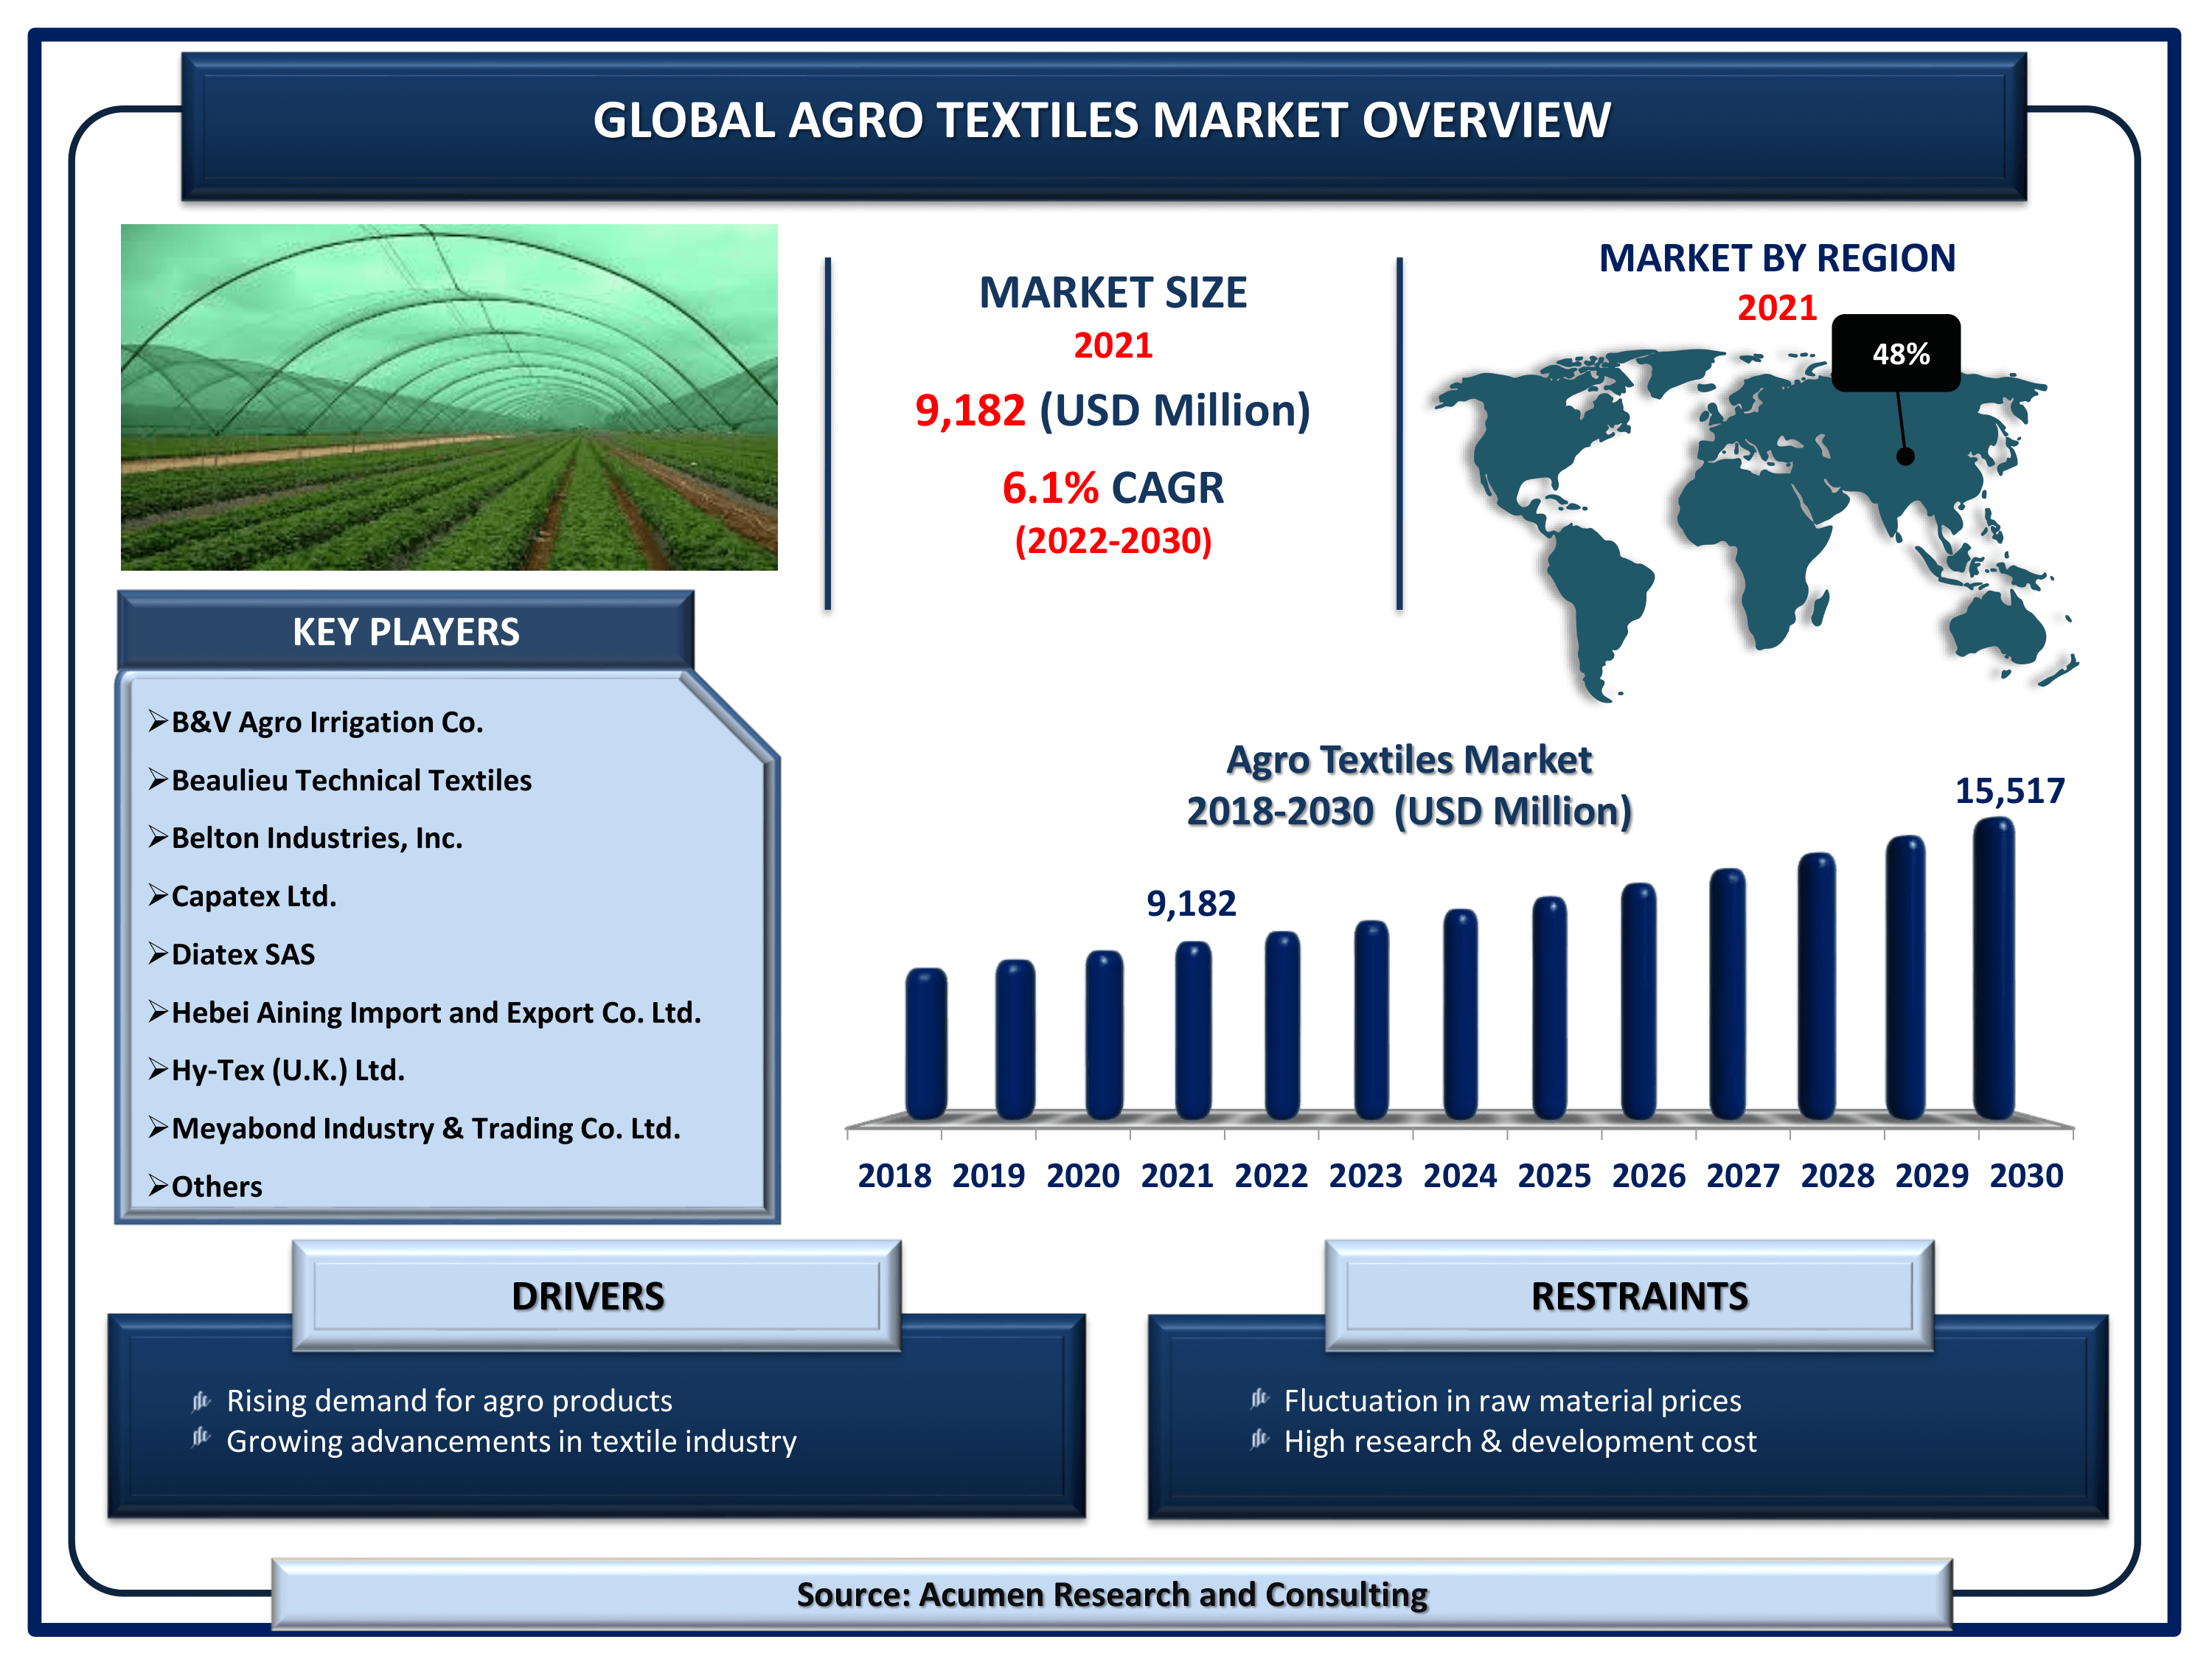 Global agro textiles market revenue is estimated to reach USD 15,517 Million by 2030 with a CAGR of 6.1% from 2022 to 2030